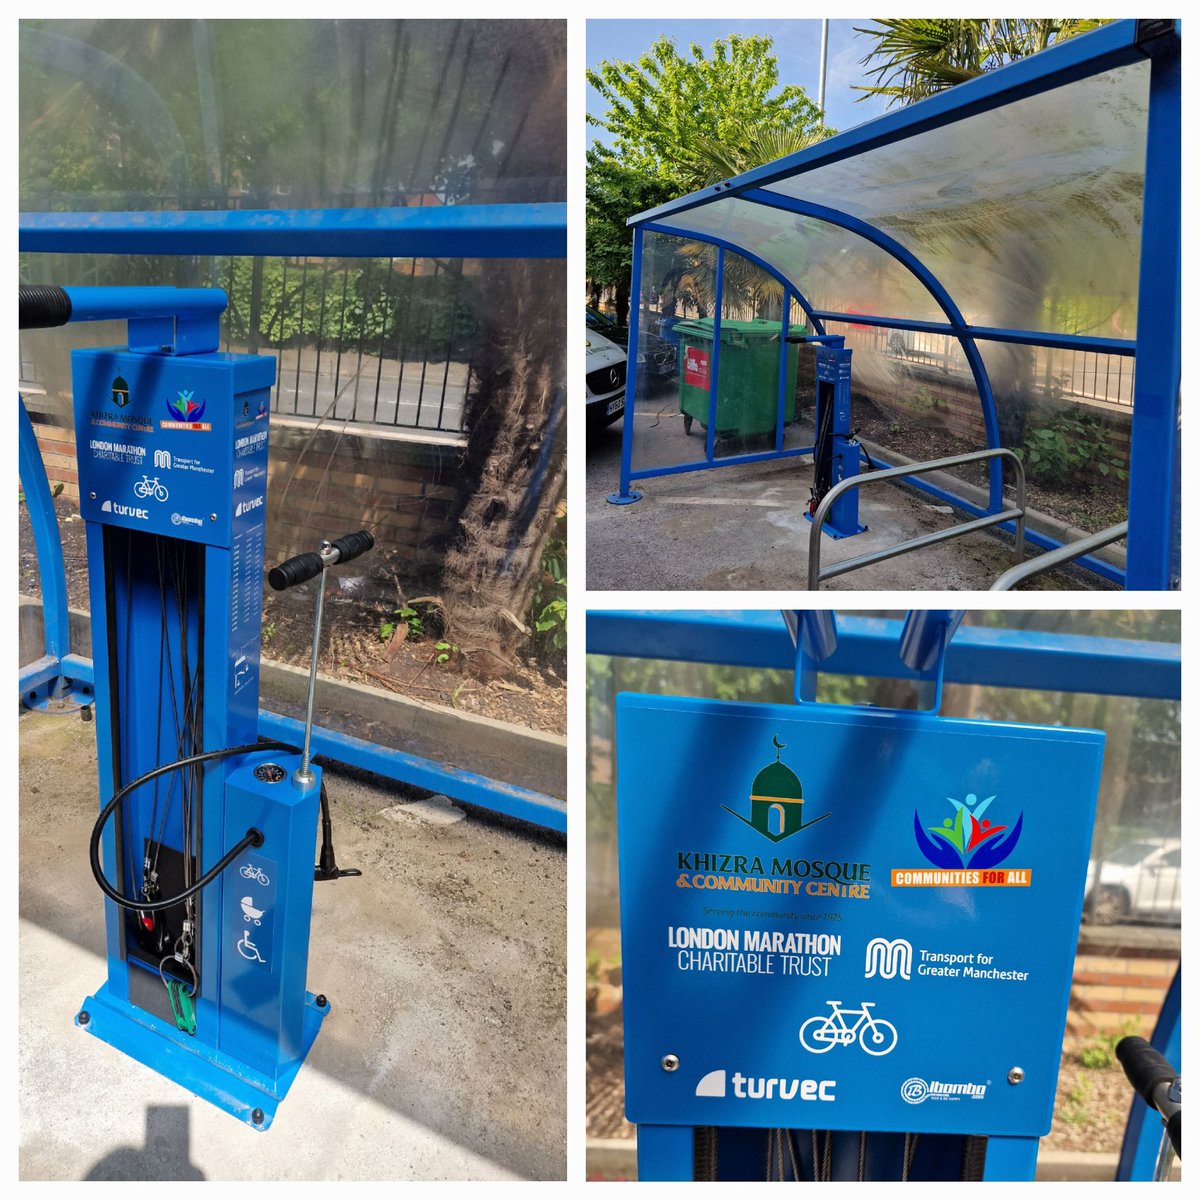 New addition to the centre to help the community be more active and look after their health and wellbeing. @WeAreCyclingUK @CyclingUKNews @OfficialTfGM @KhizraMosque